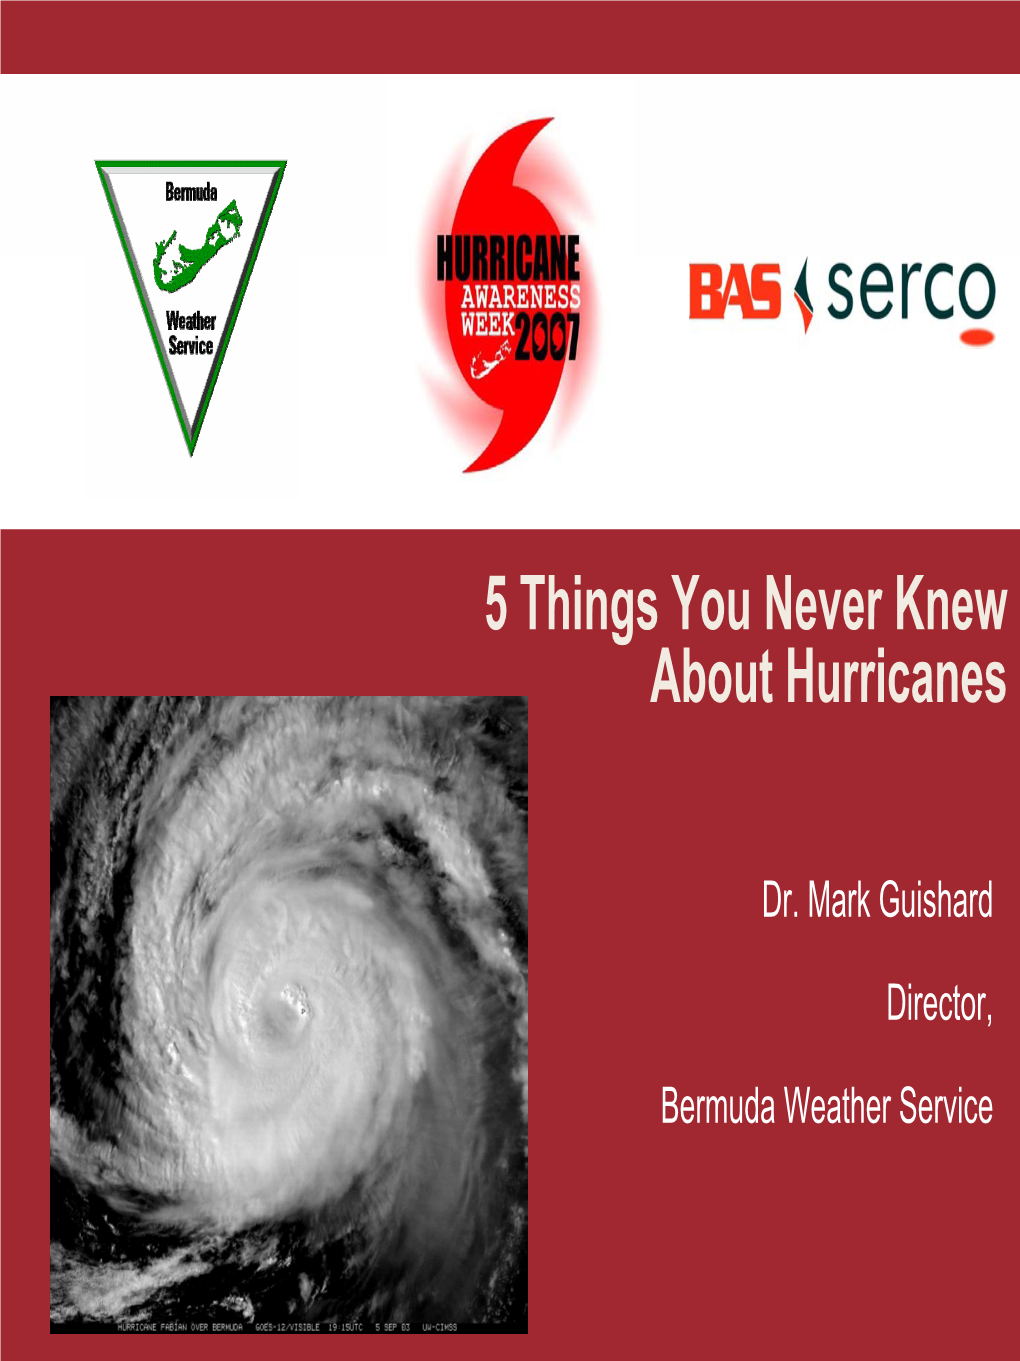 5 Things You Never Knew About Hurricanes